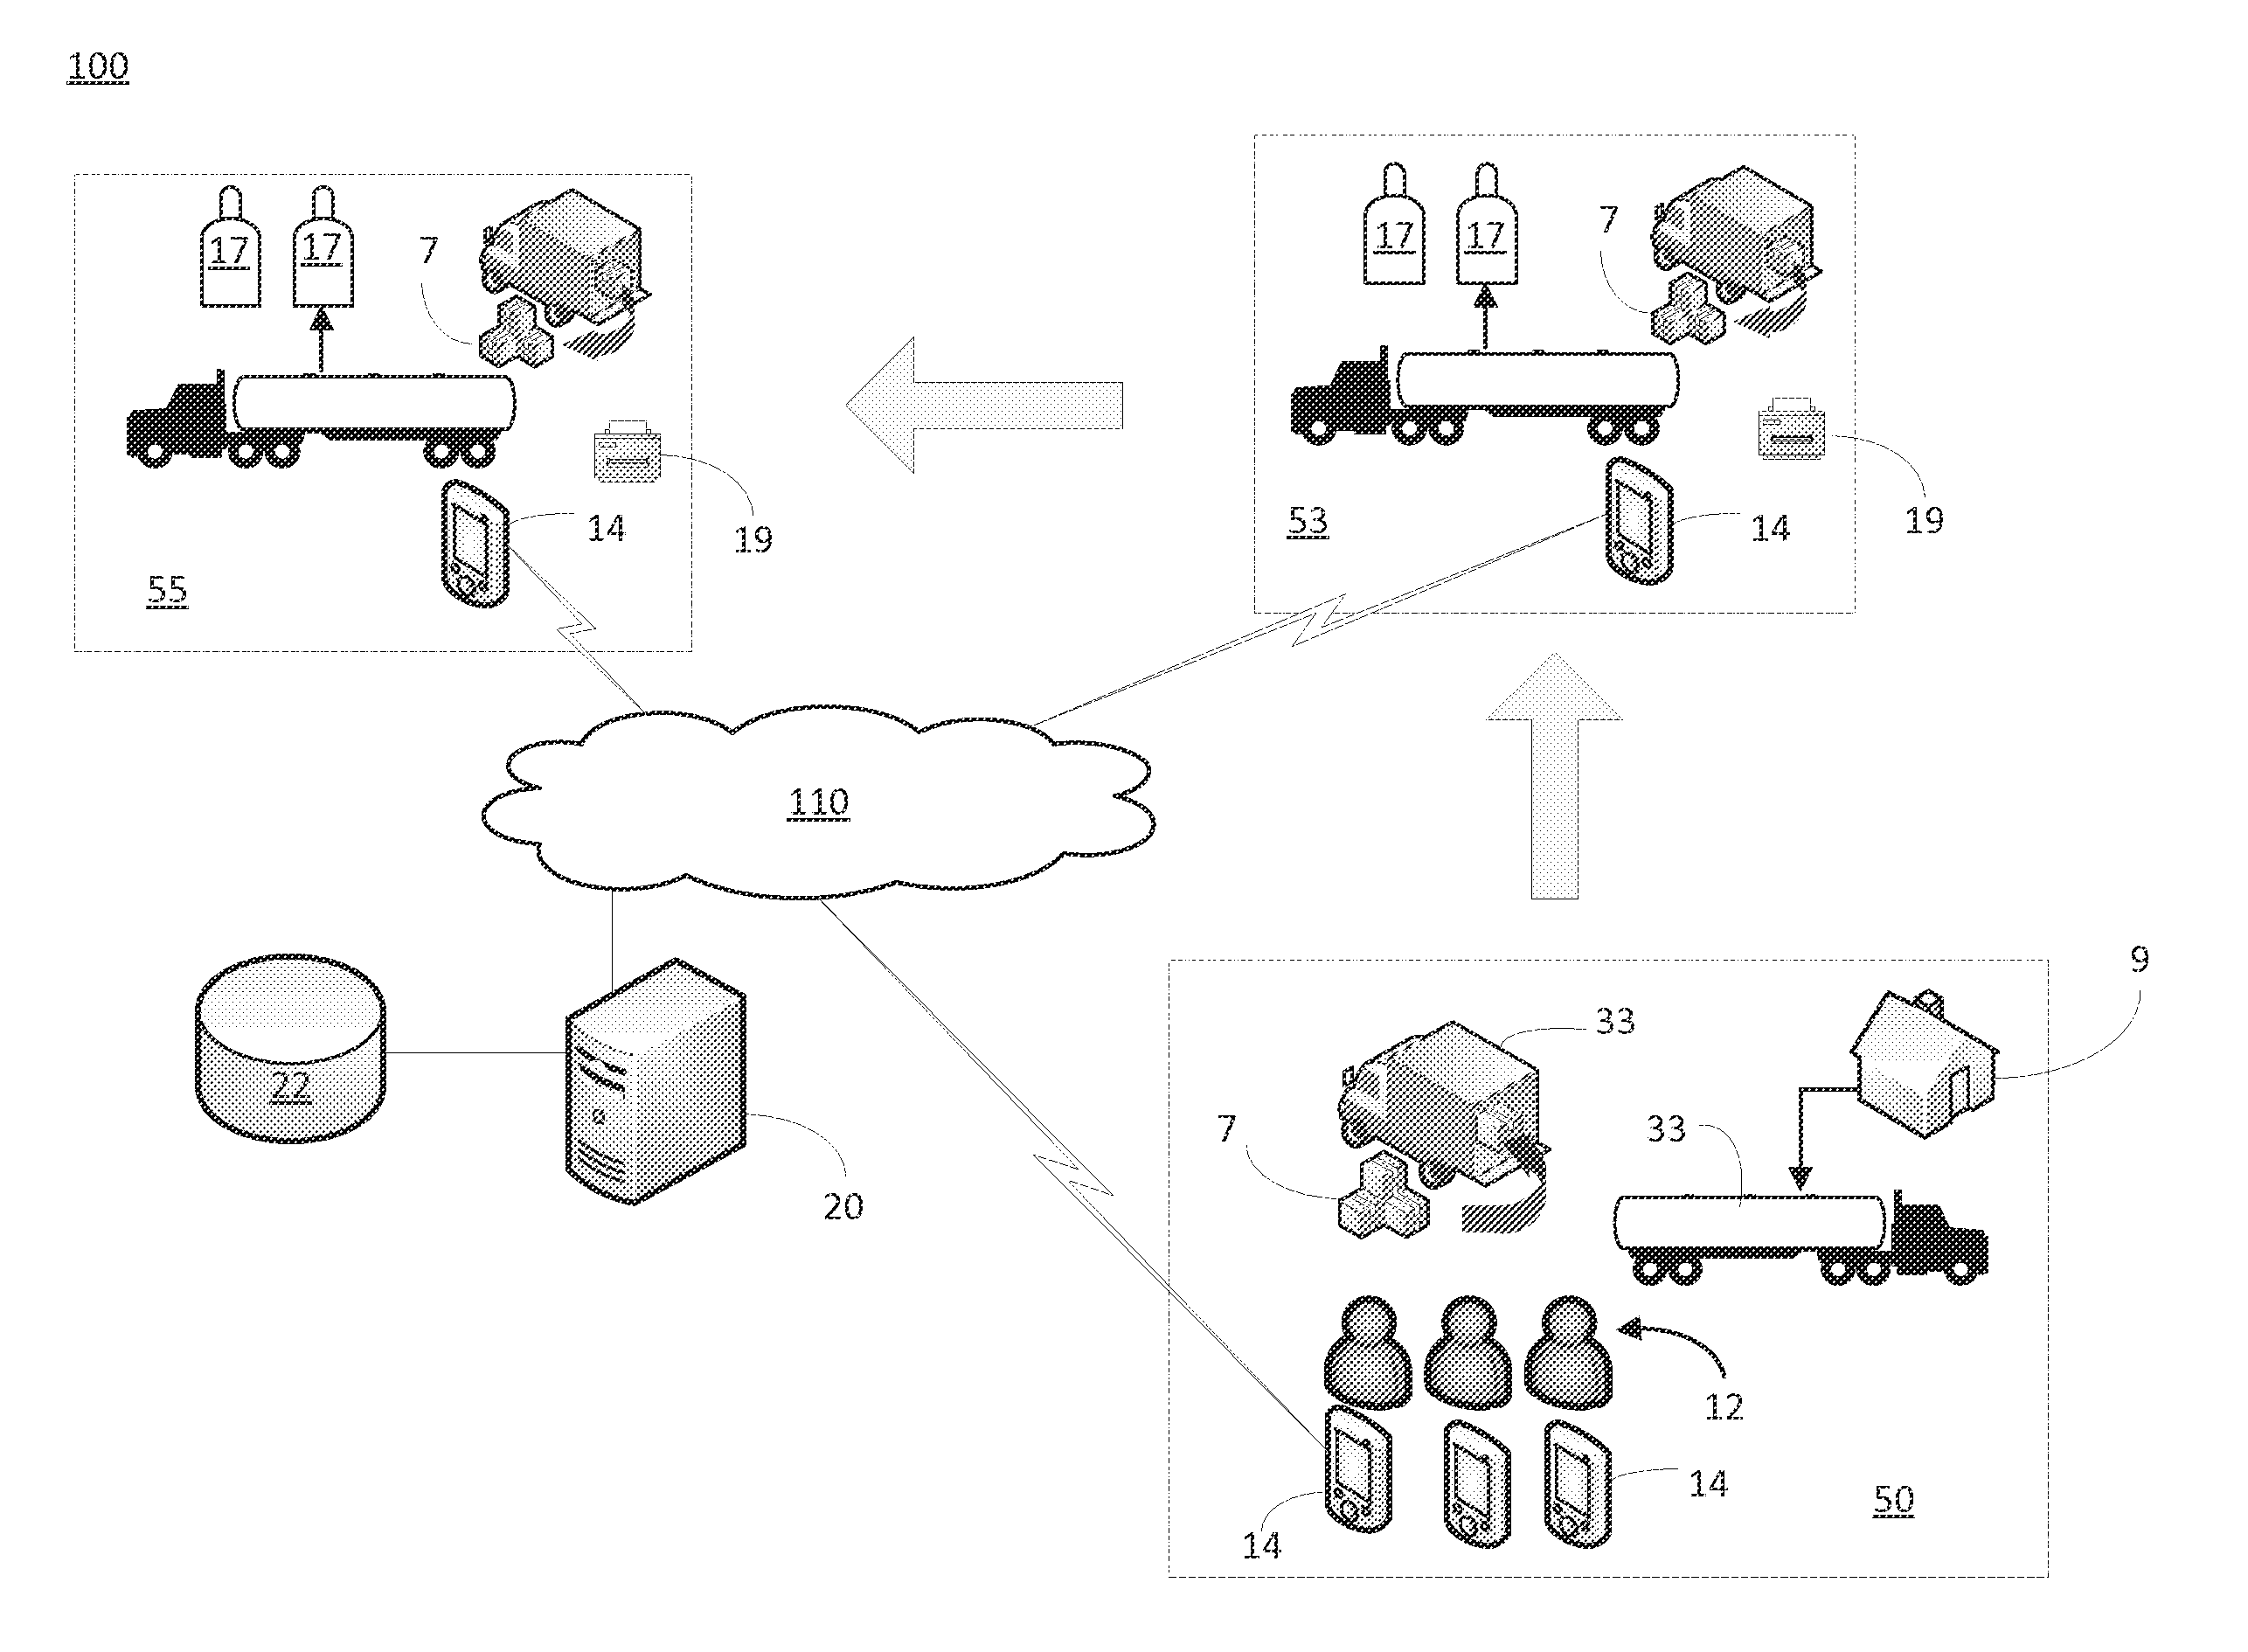 Method and system for monitoring deliveries